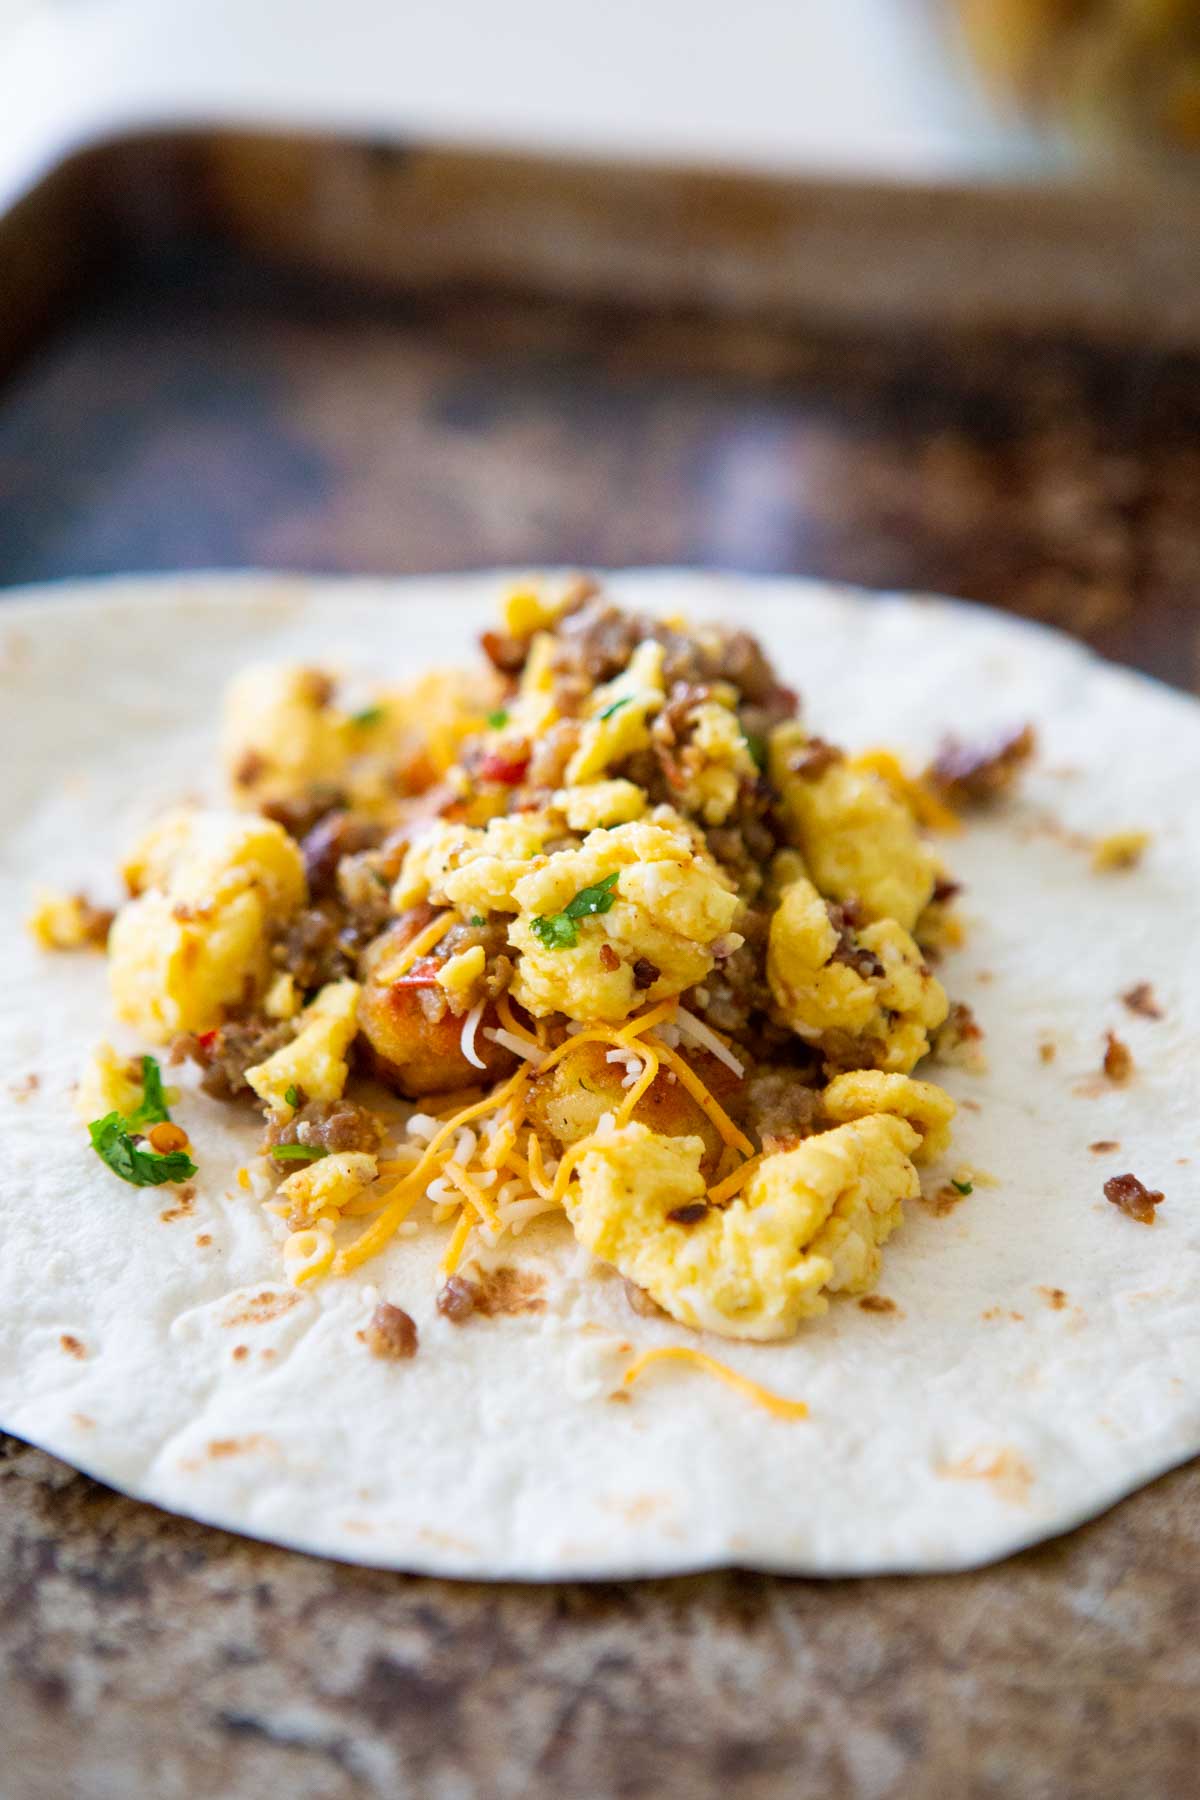 The scrambled egg and sausage filling has been scooped onto a tortilla.